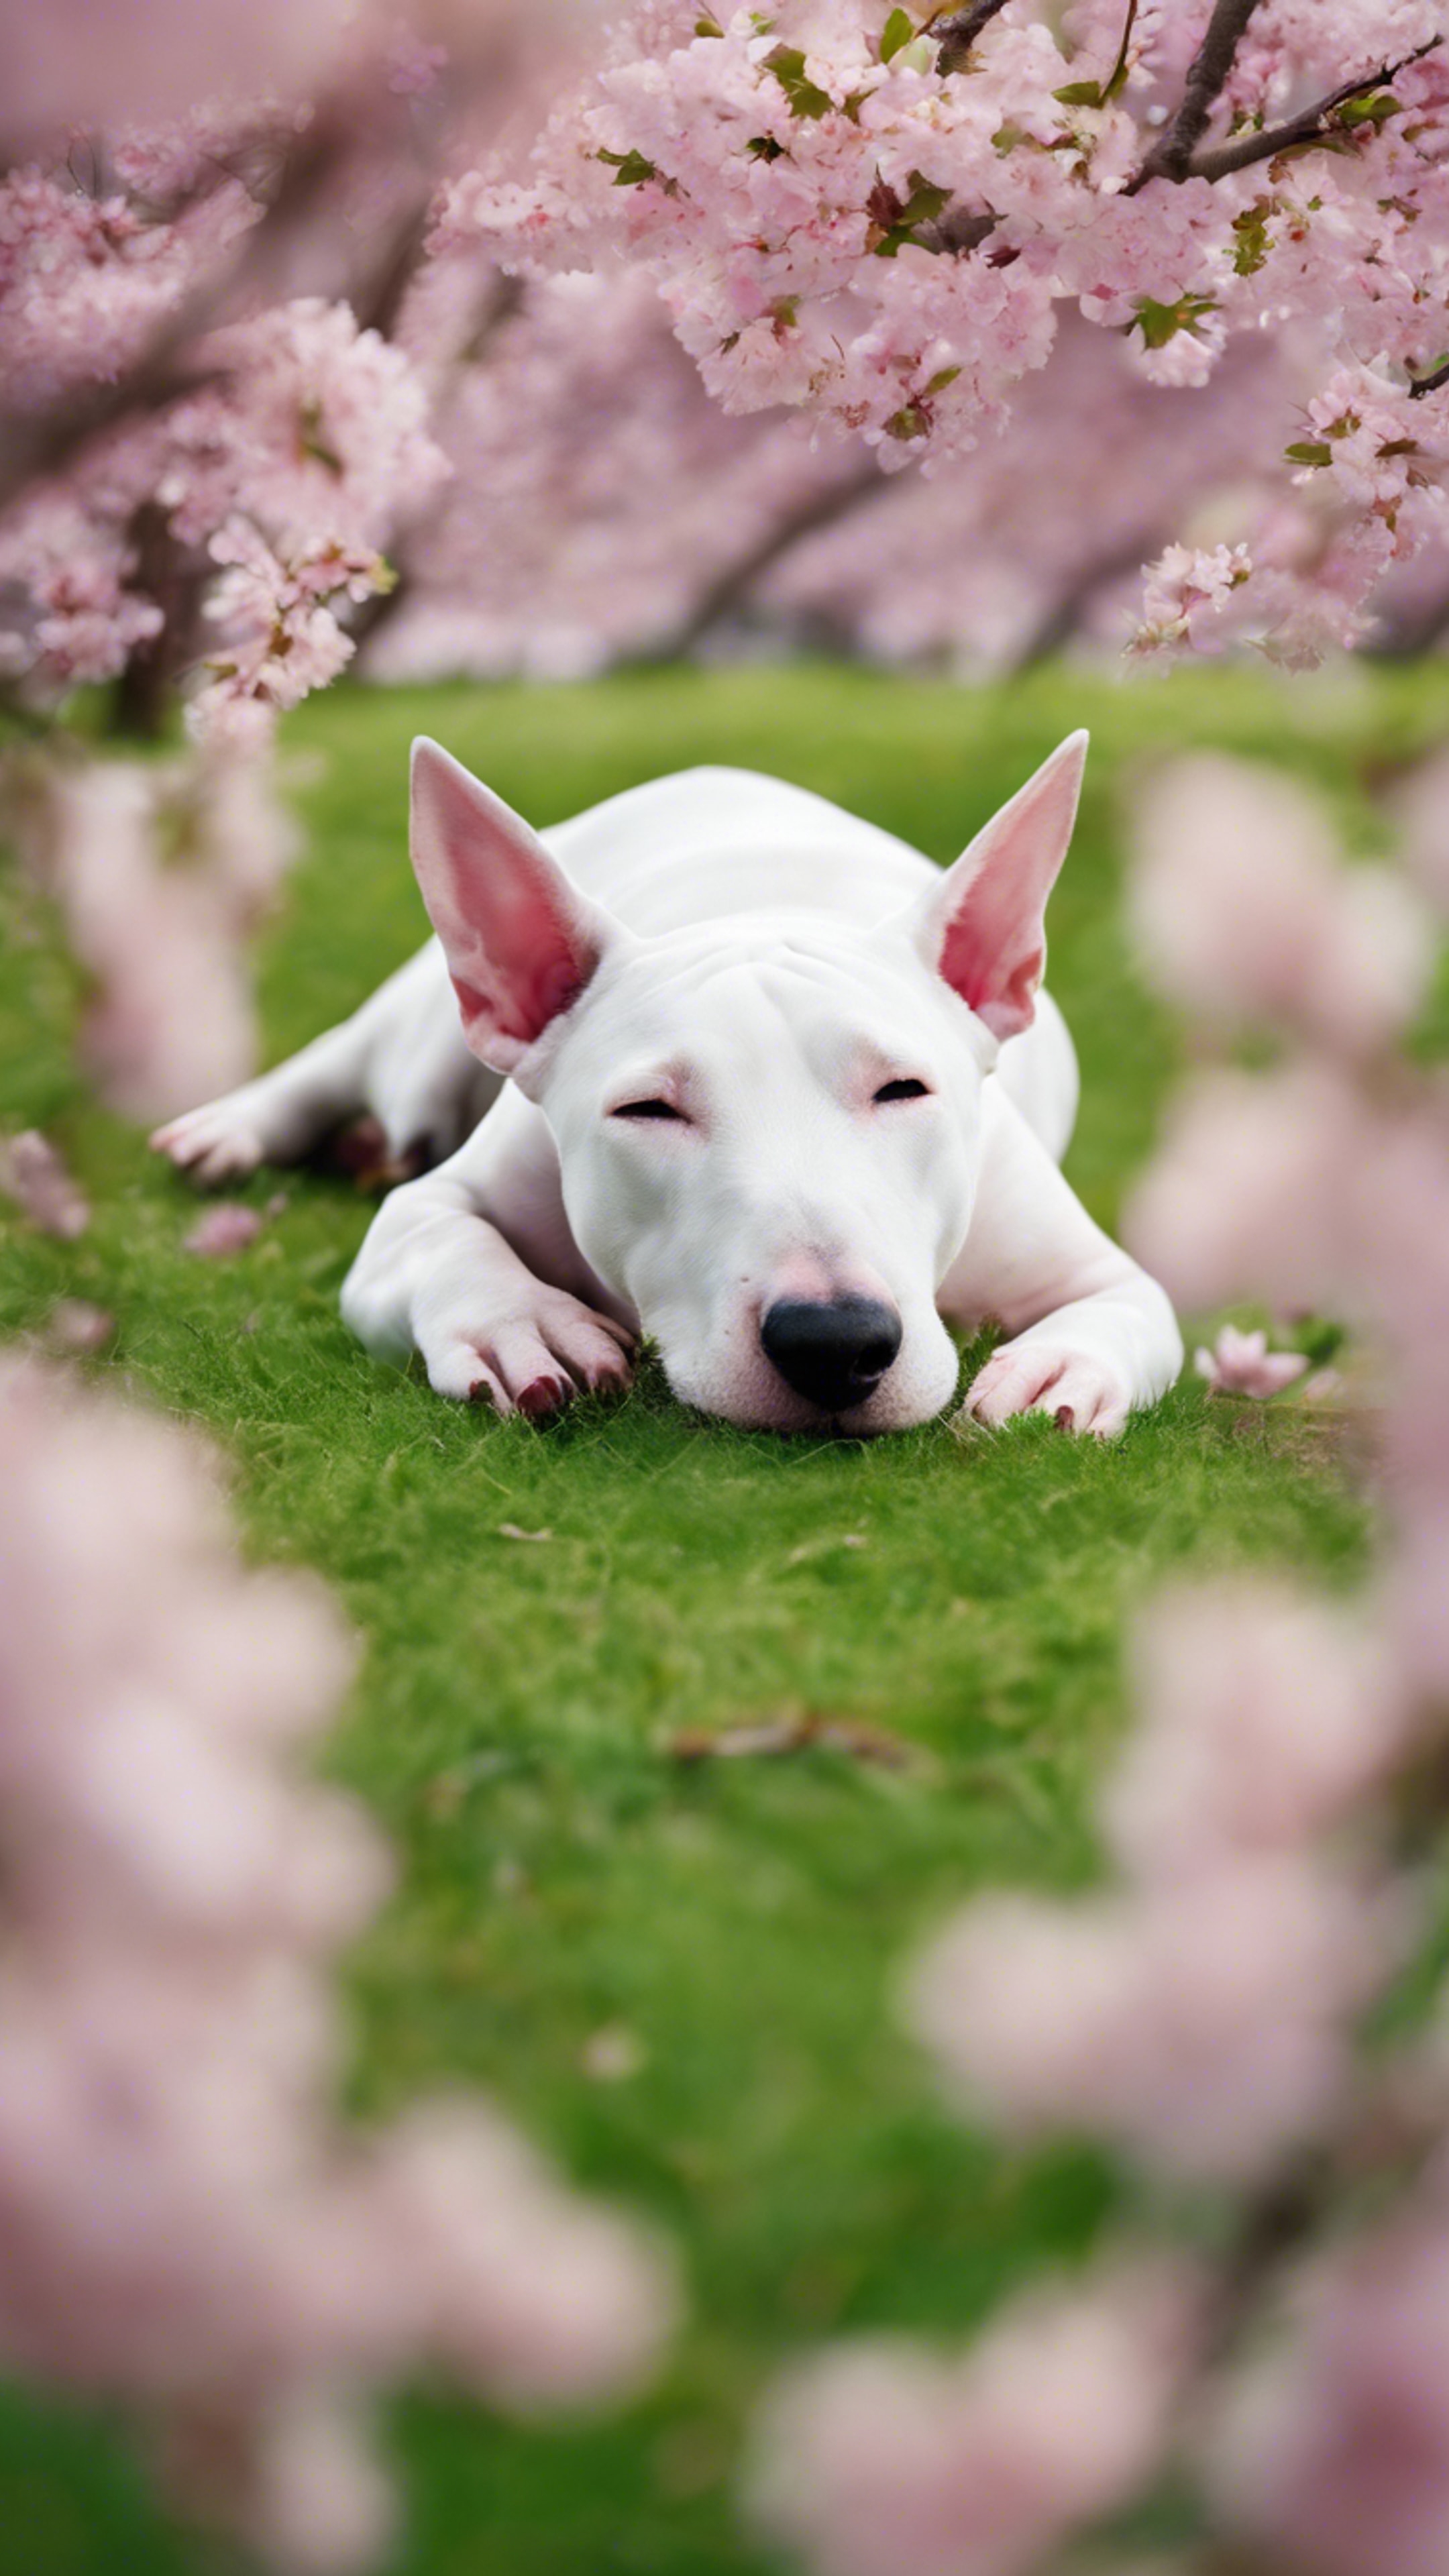 A Bull Terrier curled into a ball, sleeping in a bright green city park at the base of a cherry blossom tree. Tapet[3df408a3b3f7480298db]